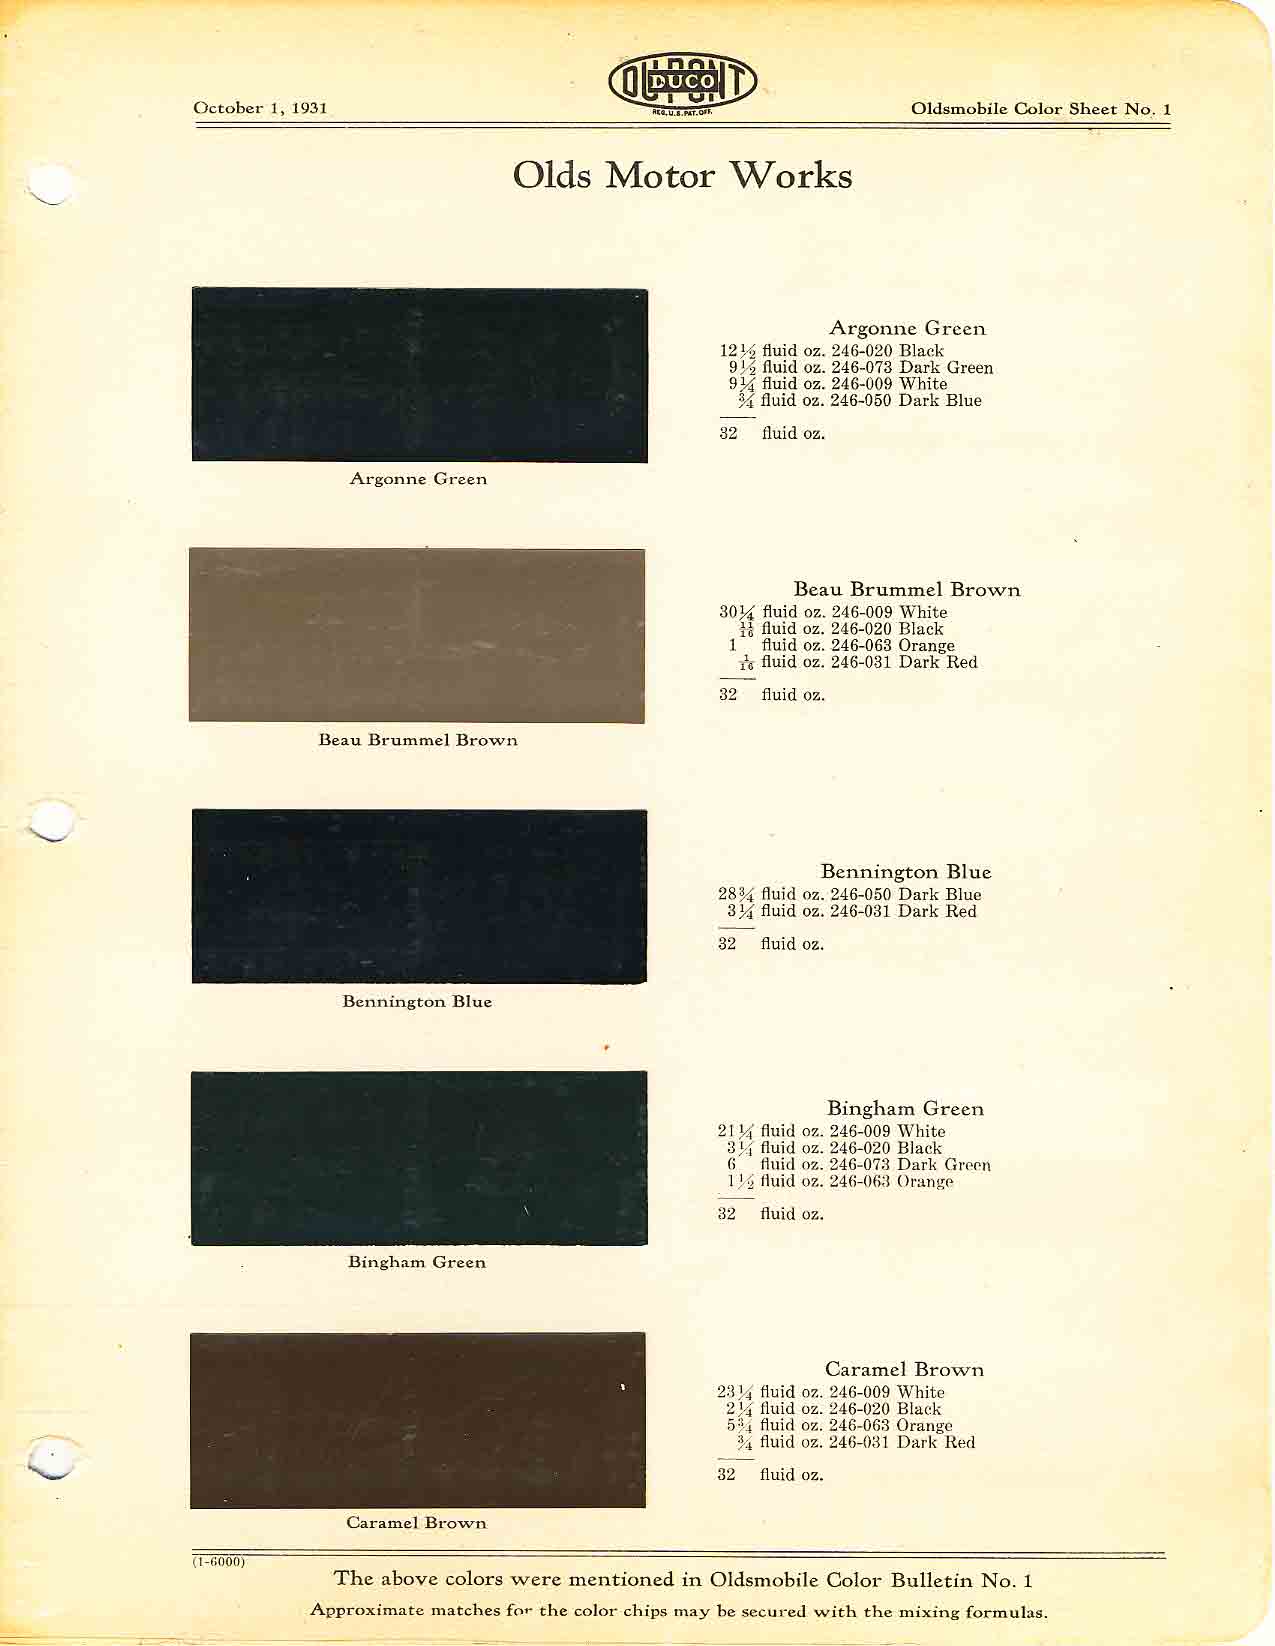 Colors and codes used on Oldsmobile Vehicles in 1931